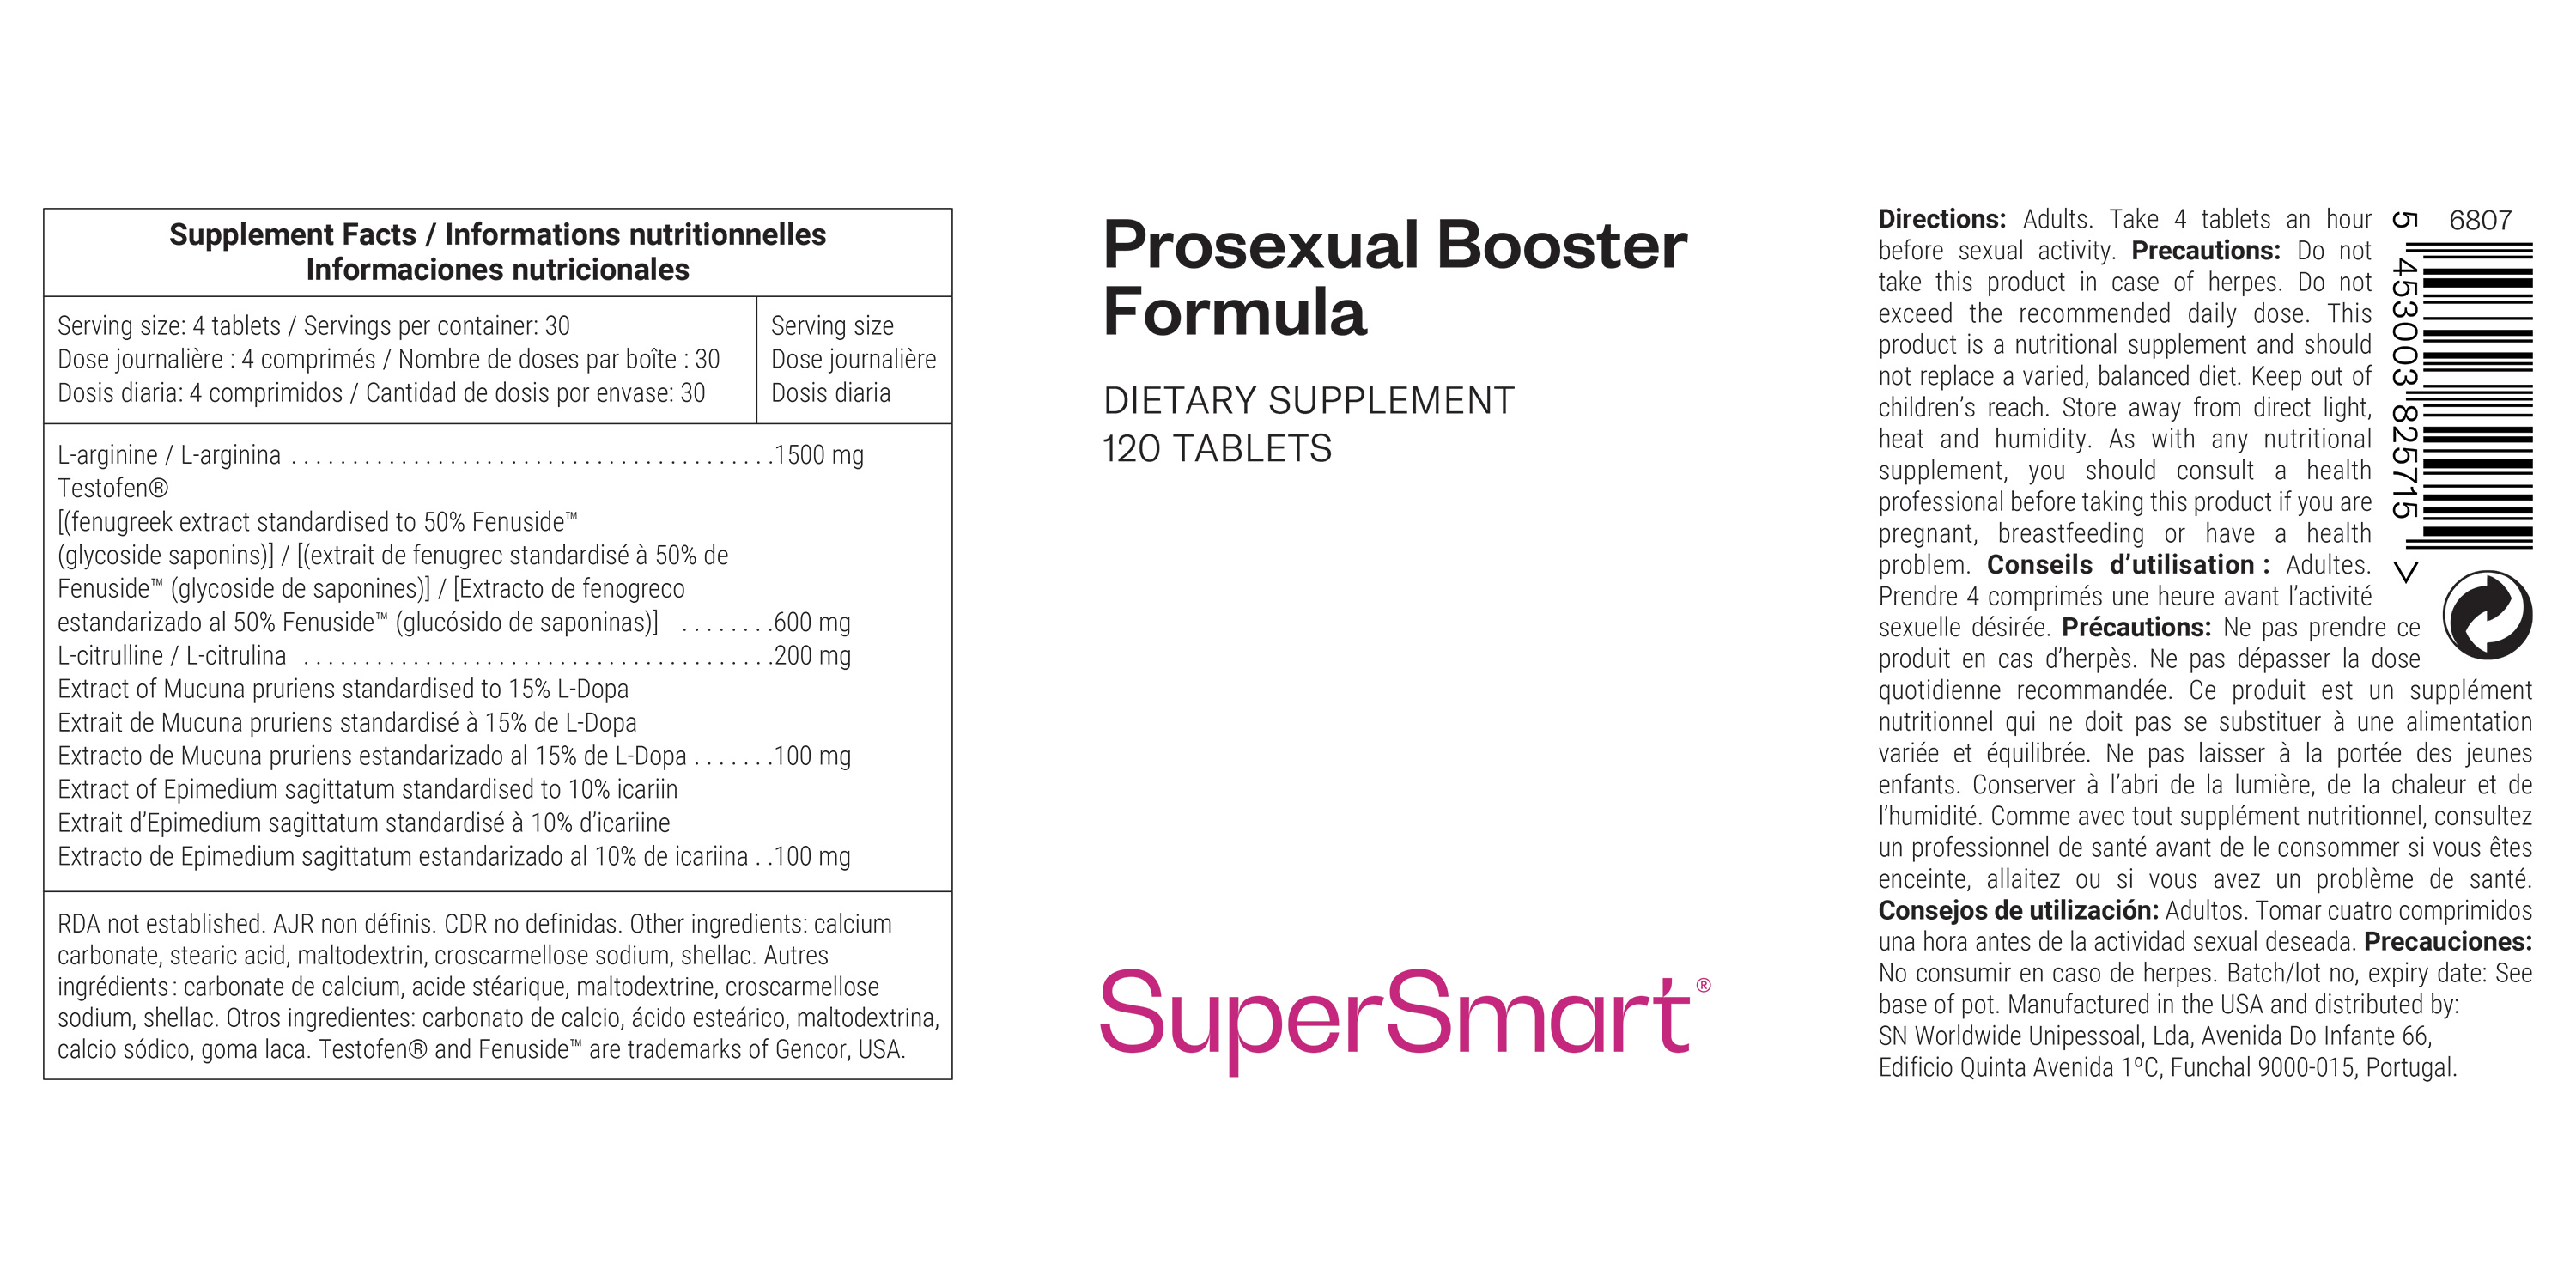 Prosexual Booster Formula